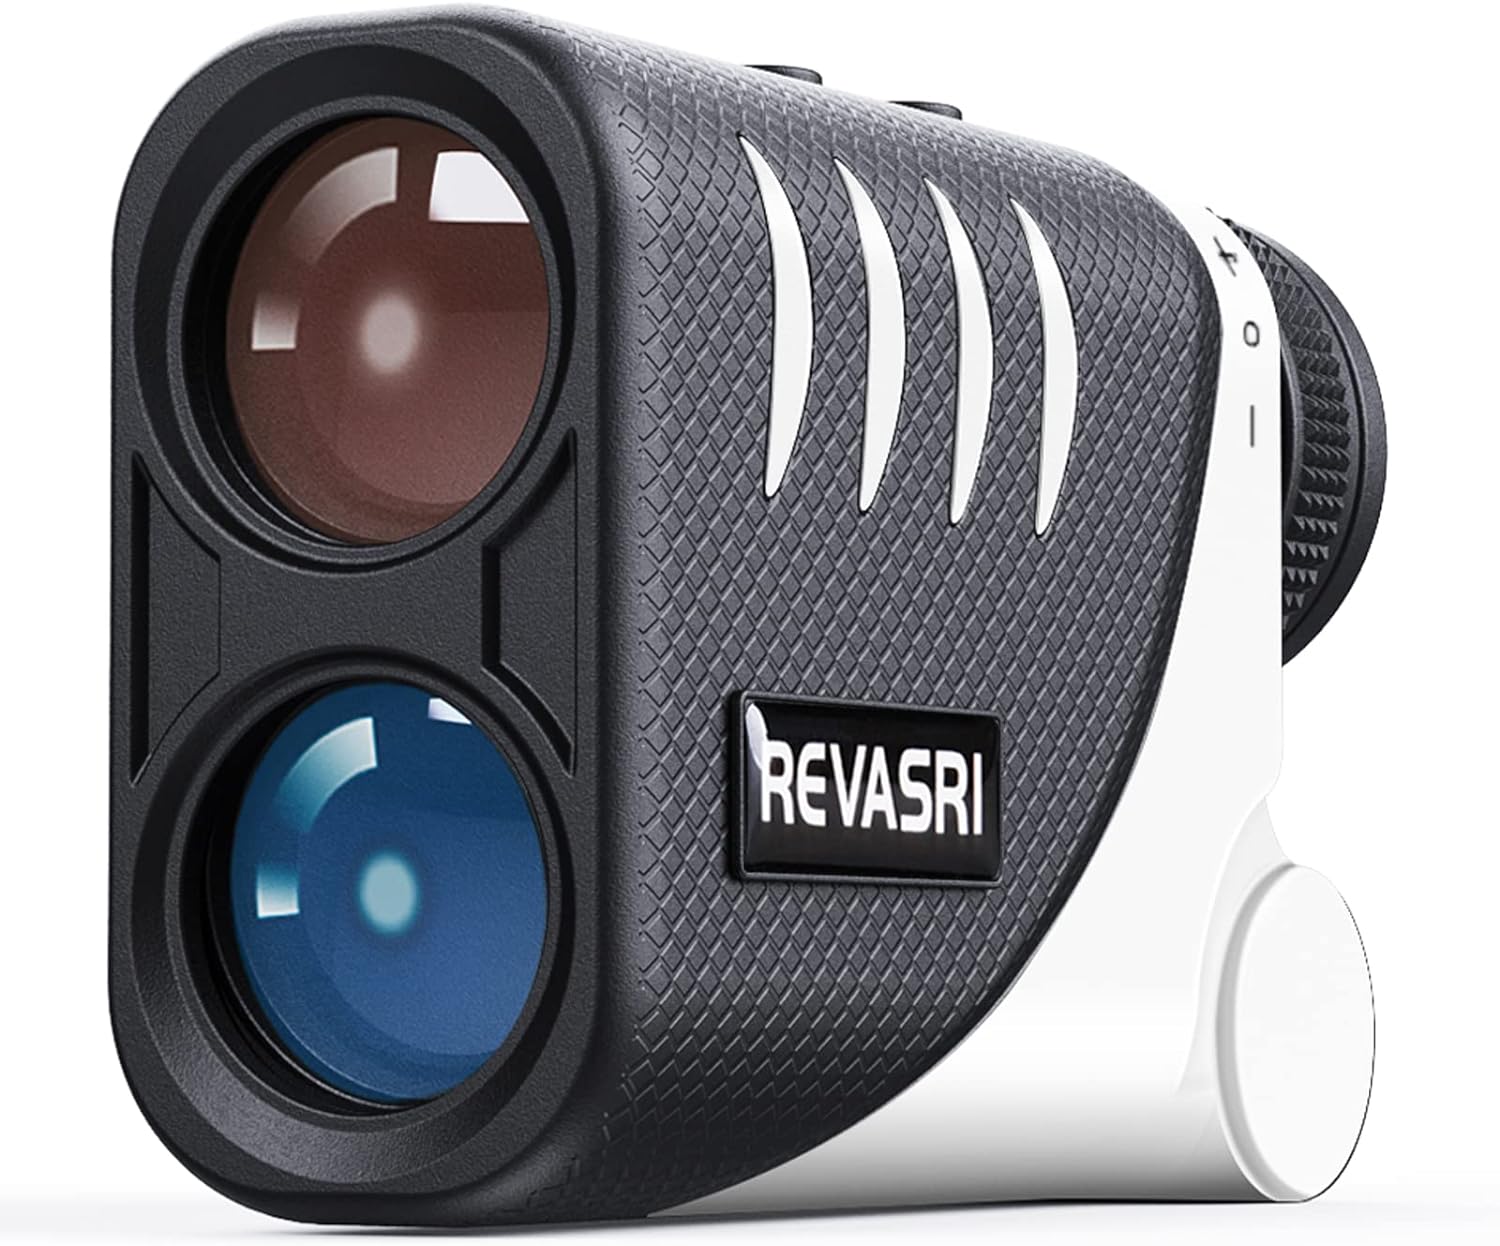 REVASRI Golf  Disc Golf Rangefinder with Slope and Pin Lock, Measure in Feet Yards Meters, 1500 Yards Laser Range Finder for Golfing, Disc Golf, Hunting, Archery, Shooting, with Battery(NF1500)